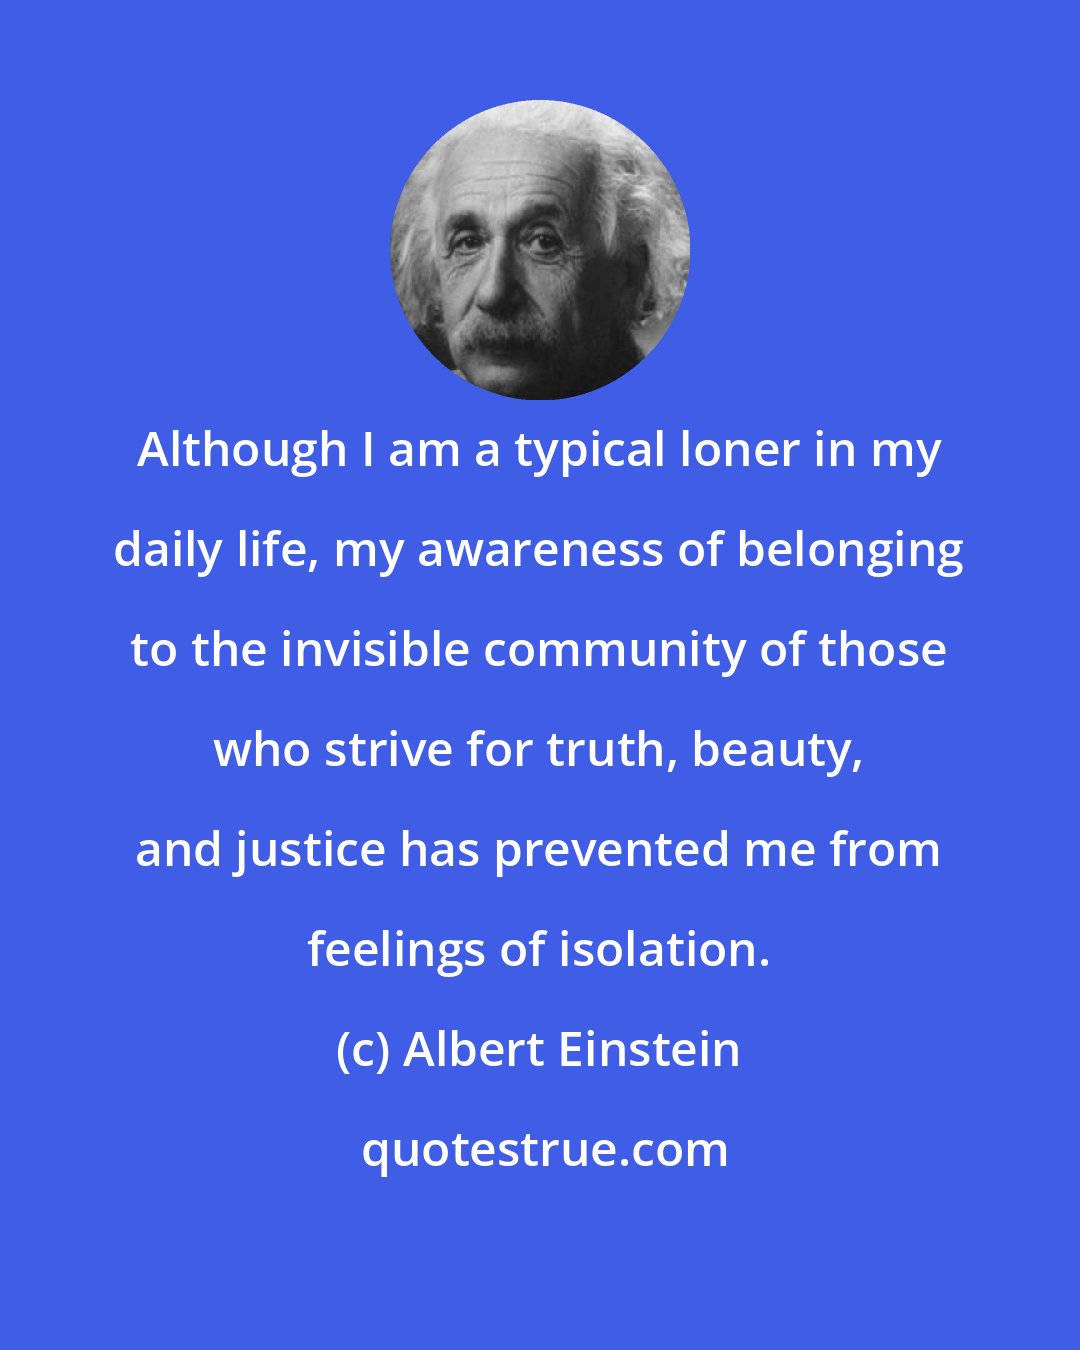 Albert Einstein: Although I am a typical loner in my daily life, my awareness of belonging to the invisible community of those who strive for truth, beauty, and justice has prevented me from feelings of isolation.